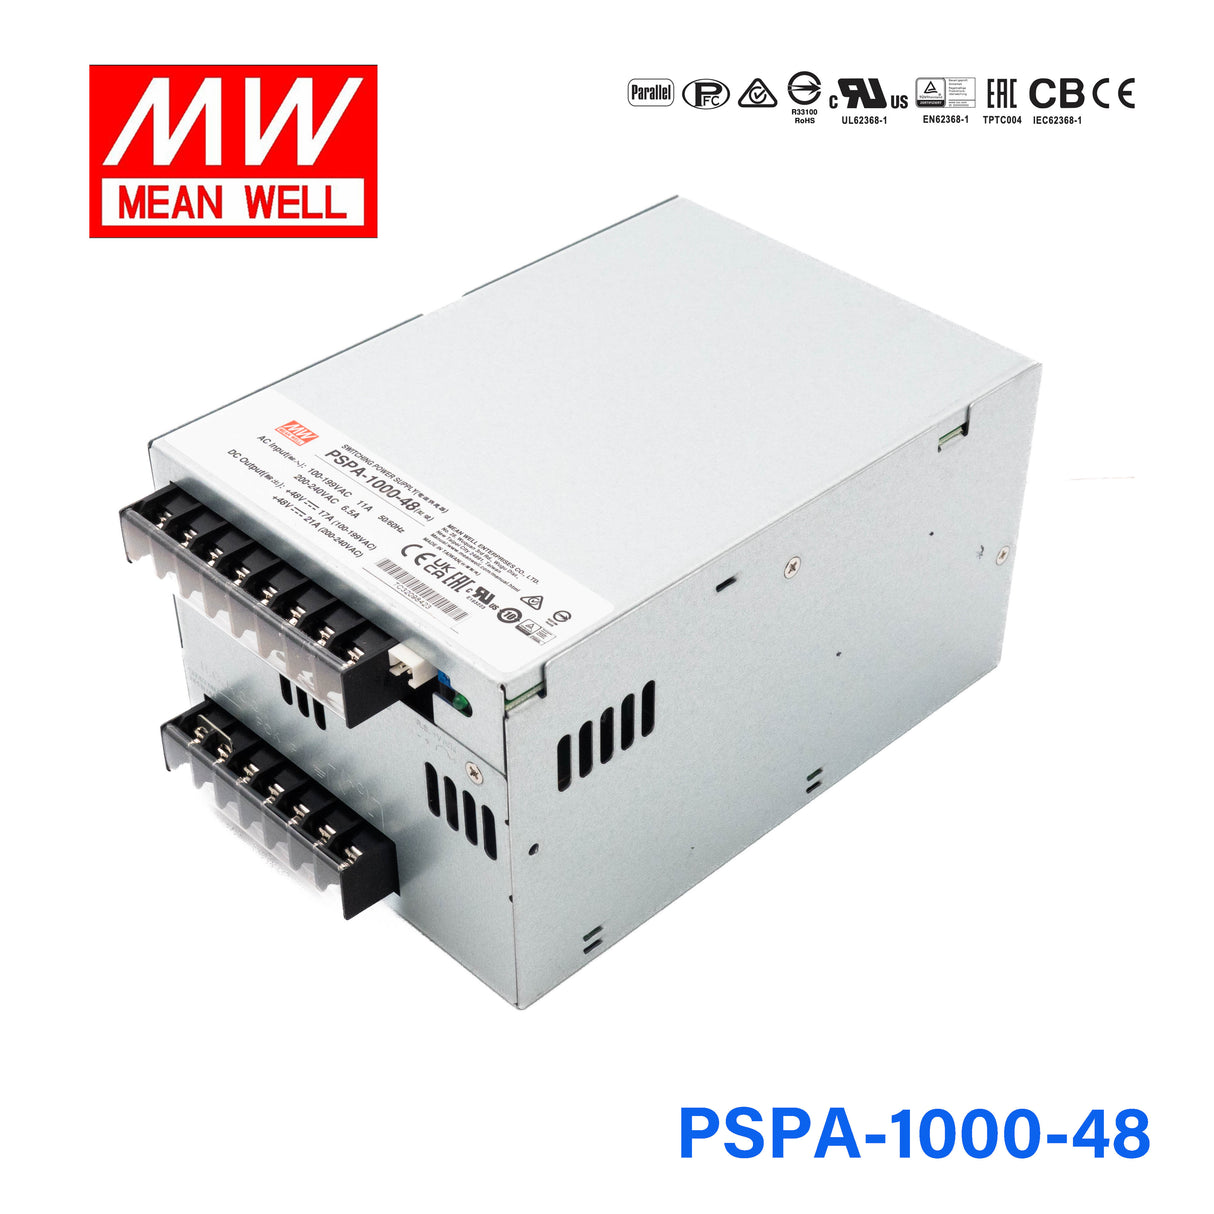 Mean Well PSPA-1000-48 Power Supply 1000W 48V